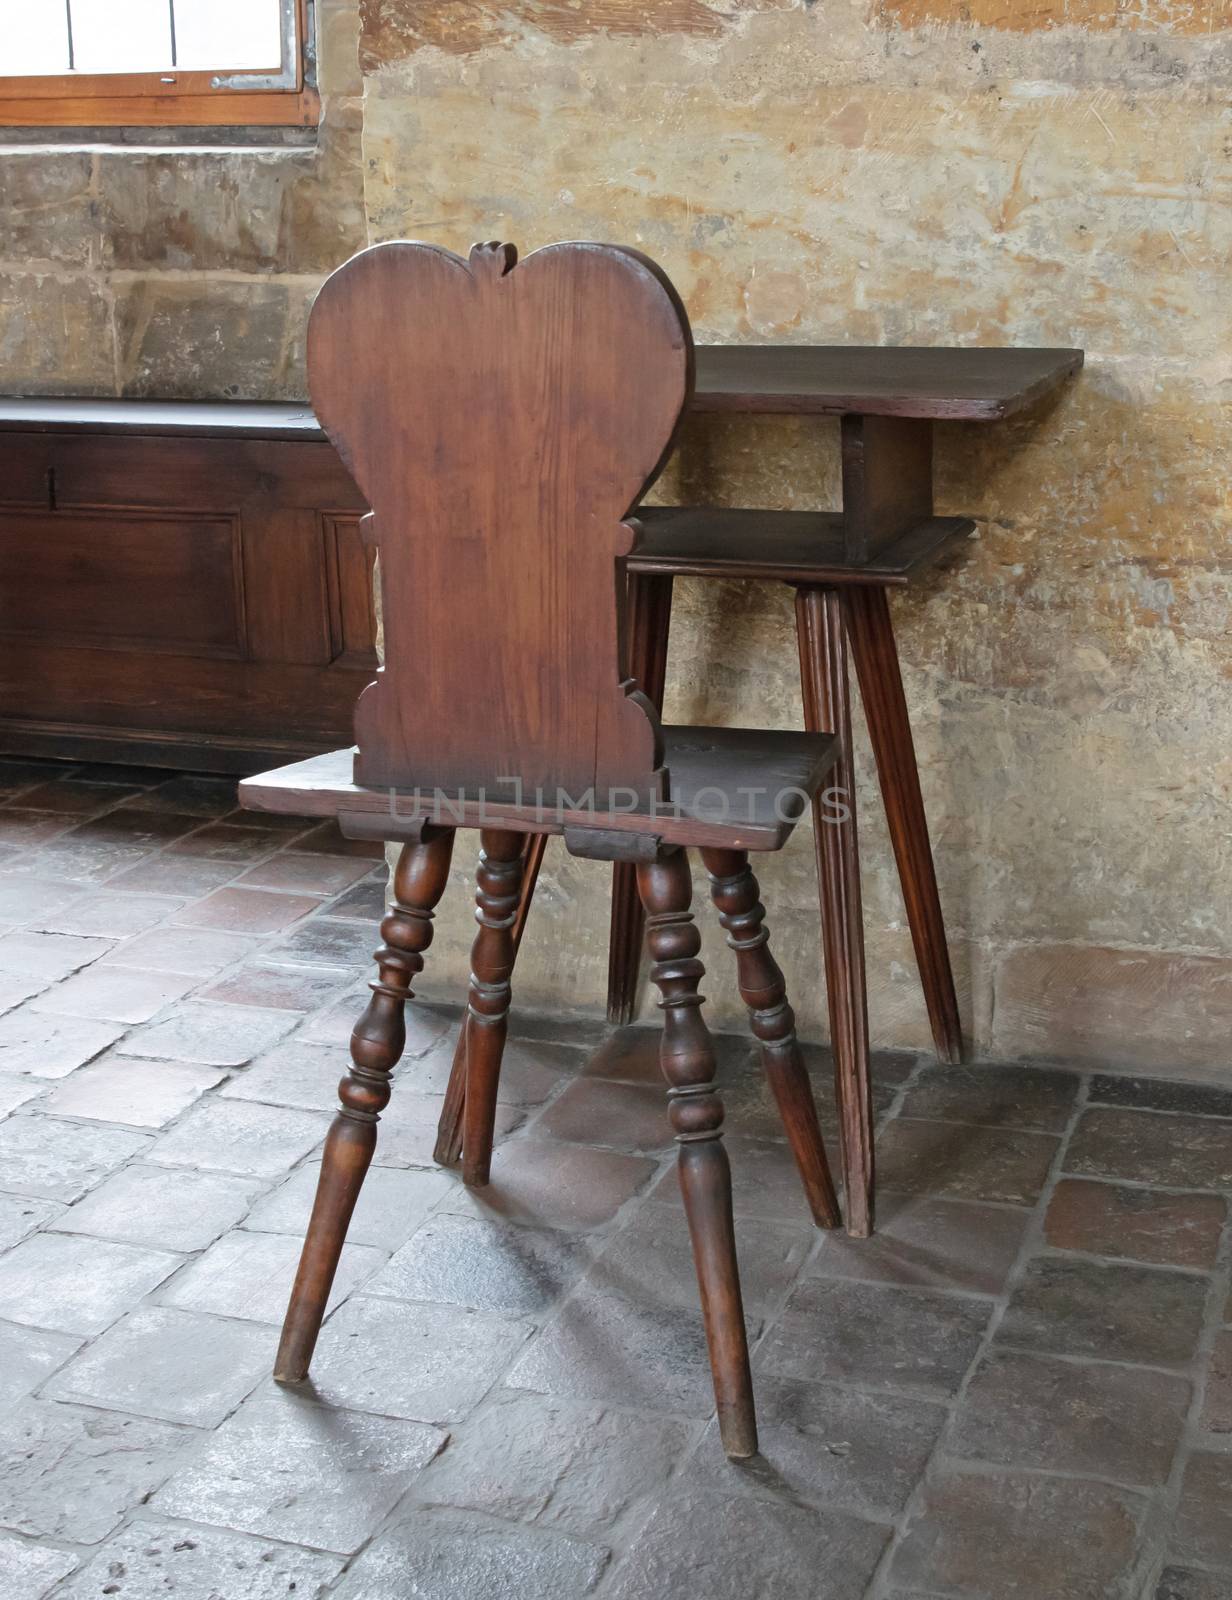 Antique desk and chair in a castle